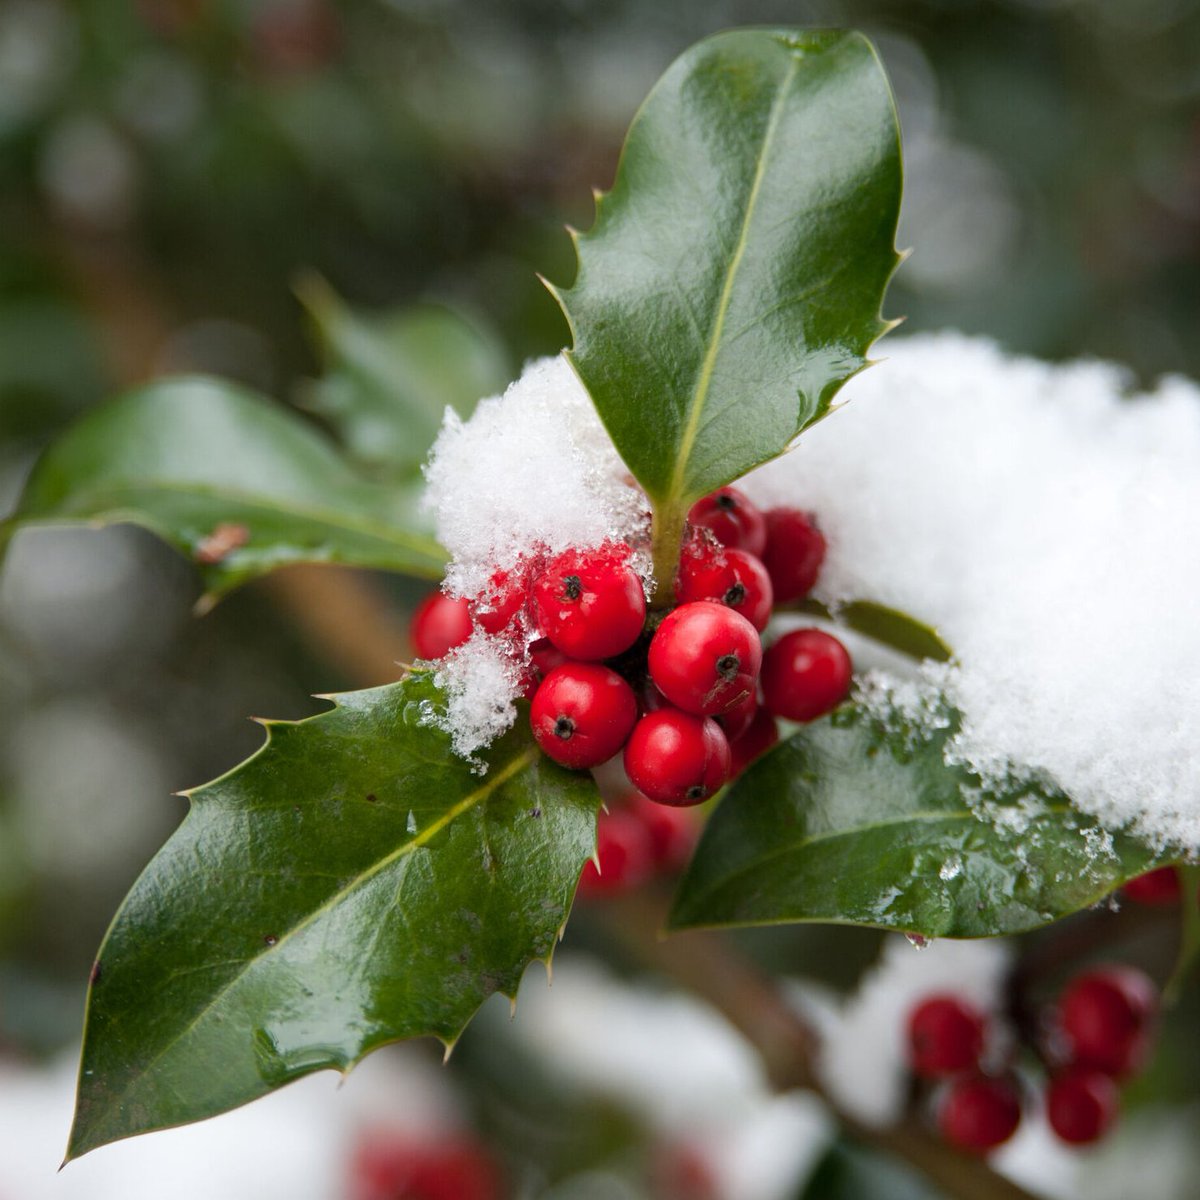 It's Christmas gifting time! 🎁 Here's an open access COMPLETE genome for English holly (Ilex aquifolium L.)! 🧬👇 ncbi.nlm.nih.gov/bioproject/PRJ… Love from Kew Science & our friends @sangerinstitute 🎅